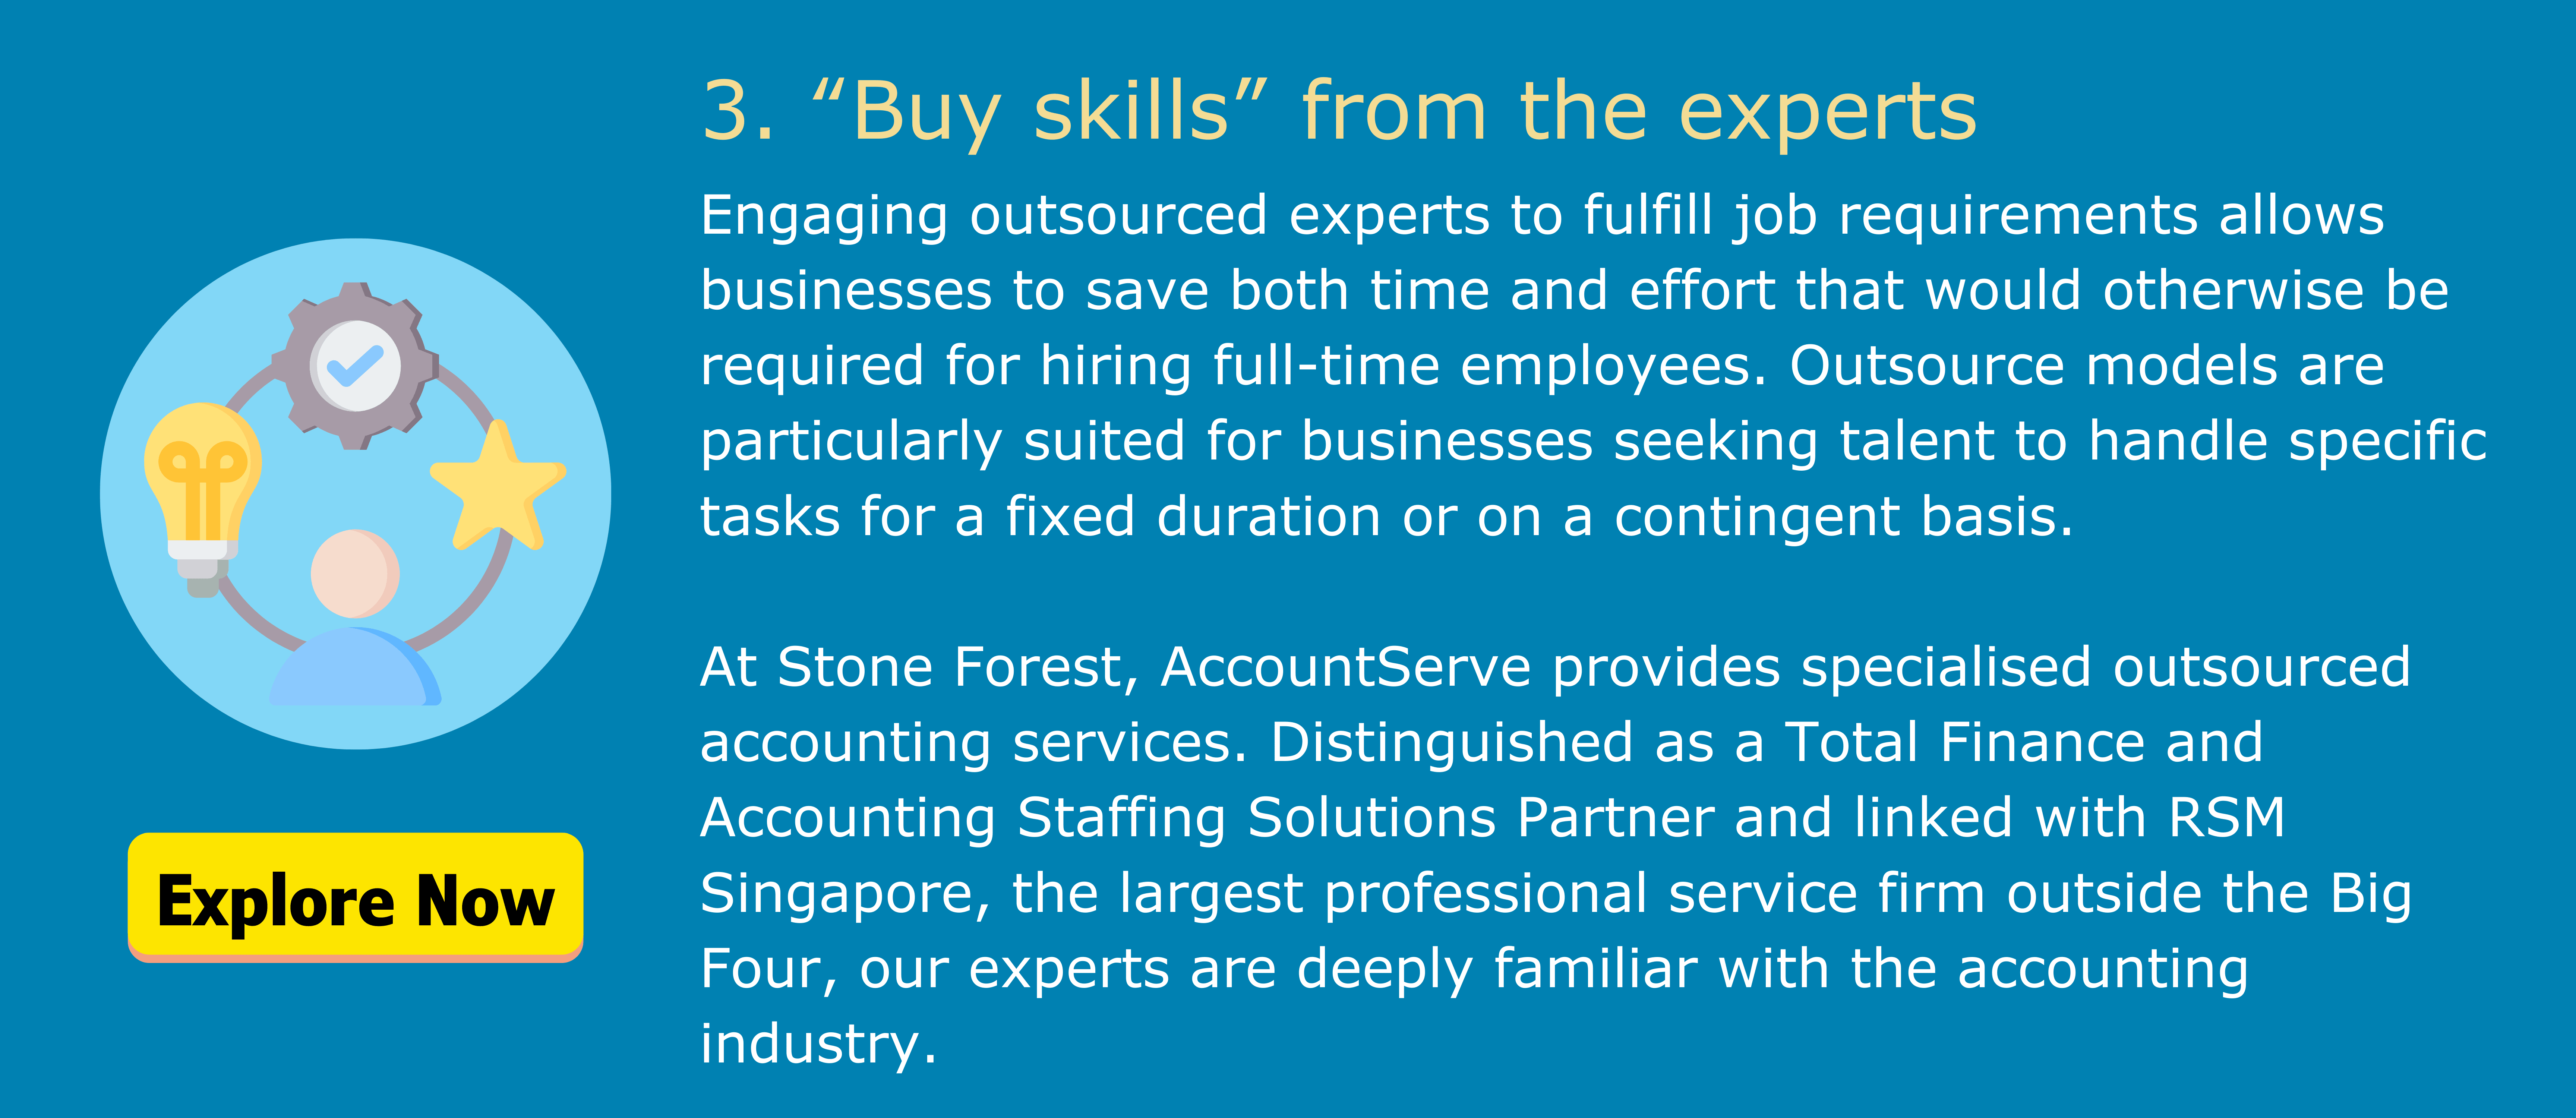 3.	“Buy skills” from the expert